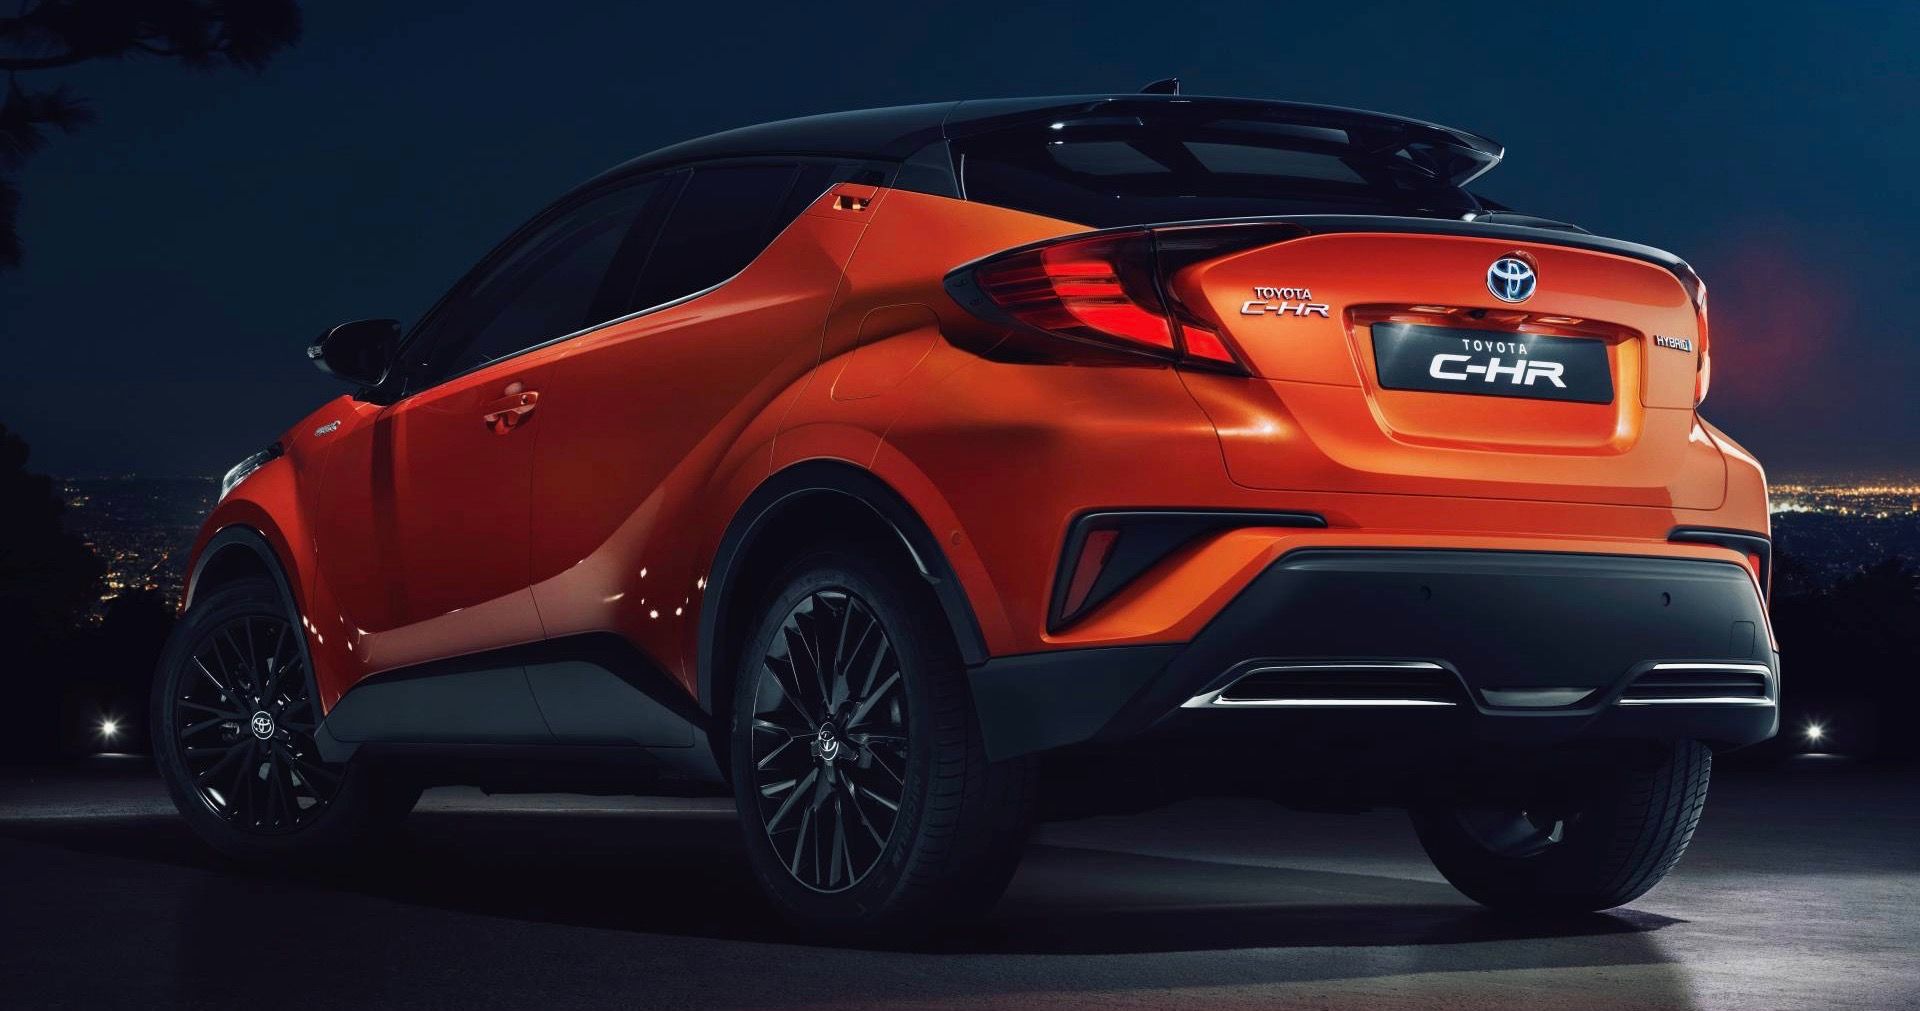 Toyota C-HR - crossover going great guns in Europe